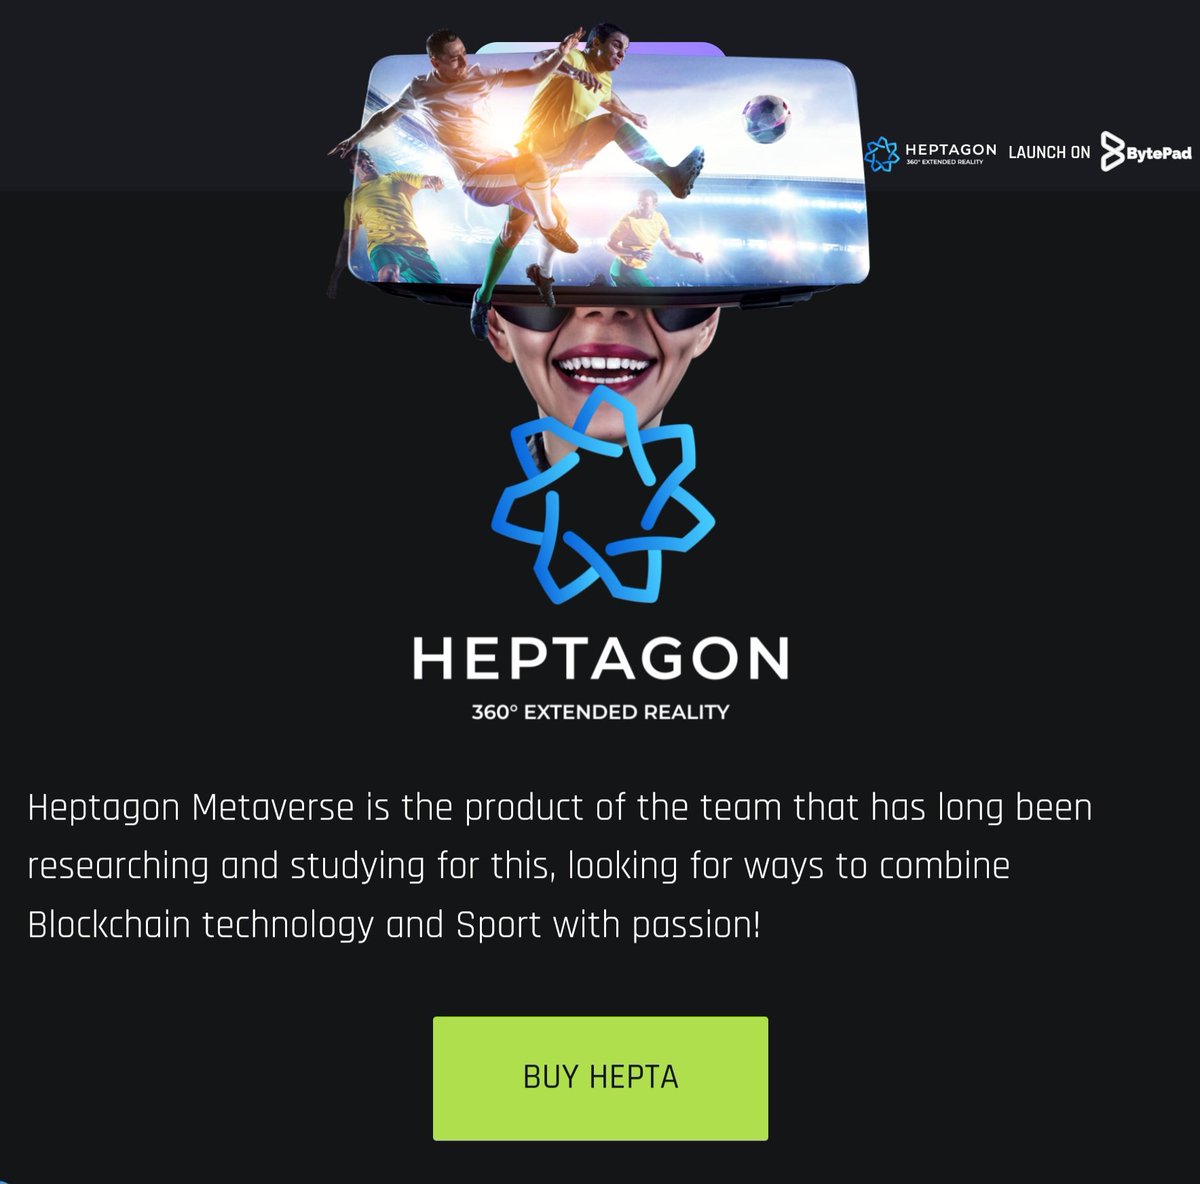 🔥Score big with HEPTA! 🌟The official token of the Heptagon Metaverse is now available on @Bytepad. ✅️Join the game and secure your tokens today to be part of the ultimate sports experience in the virtual world! #HEPTA #HeptagonMetaverse #Bytepad #Crypto #Sports'